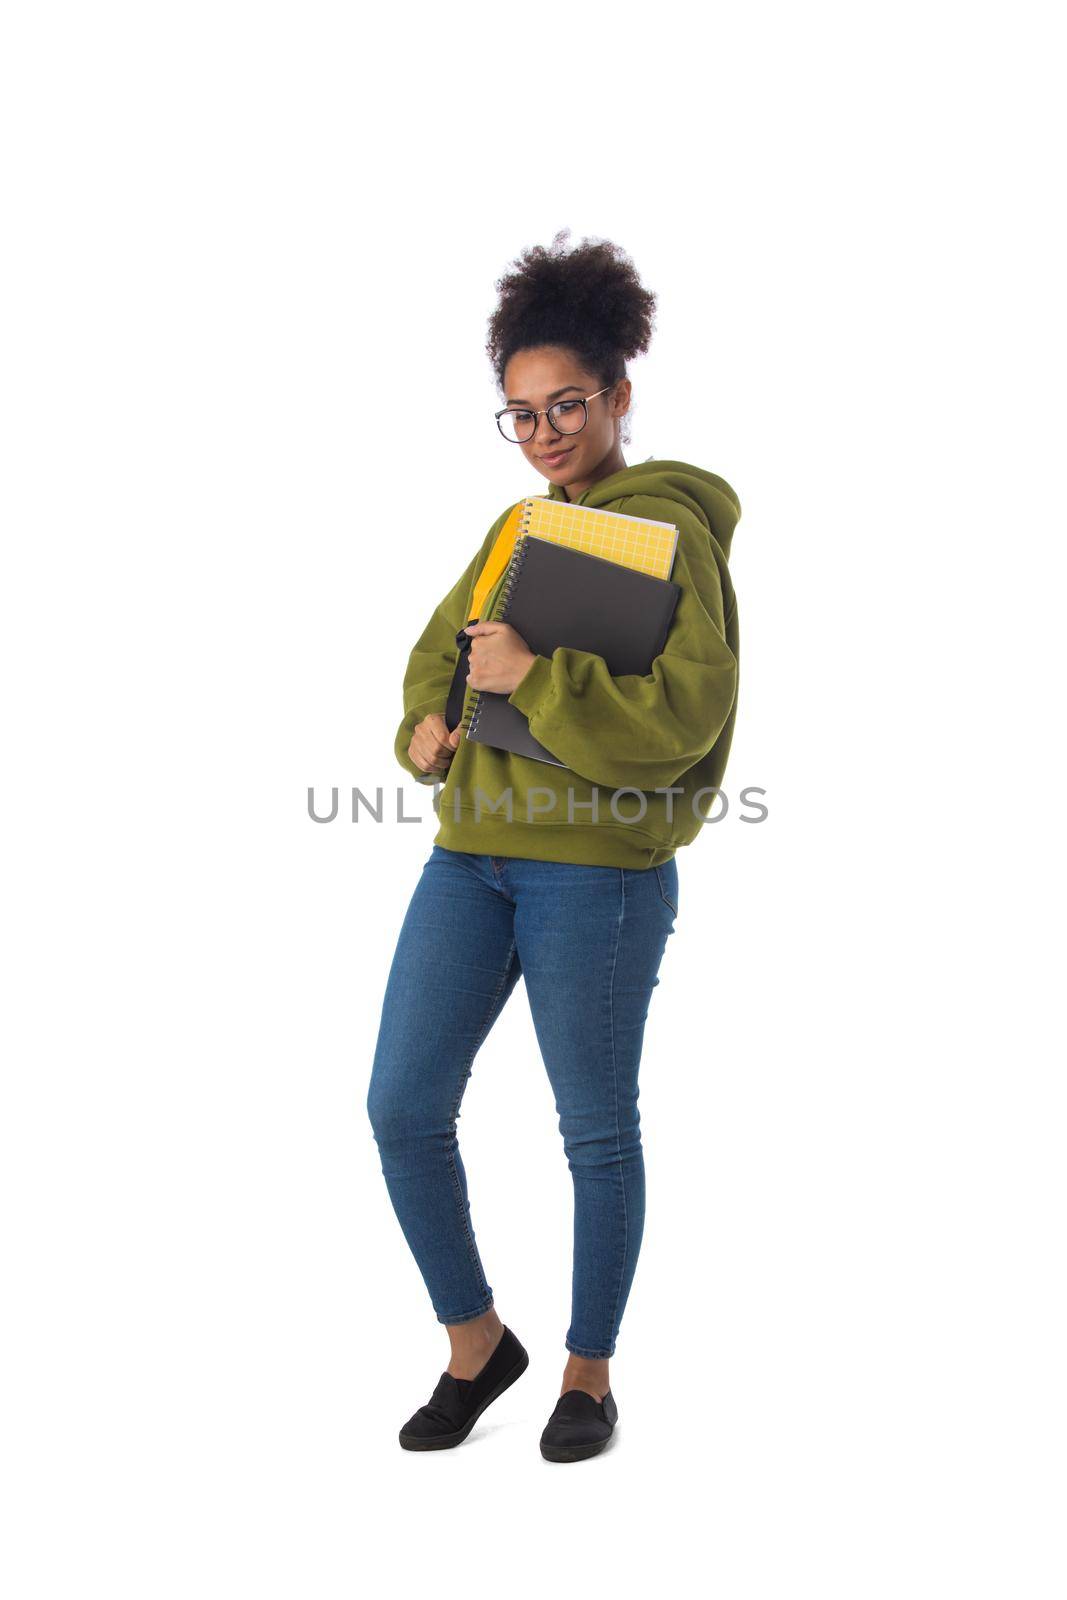 African american university student by ALotOfPeople